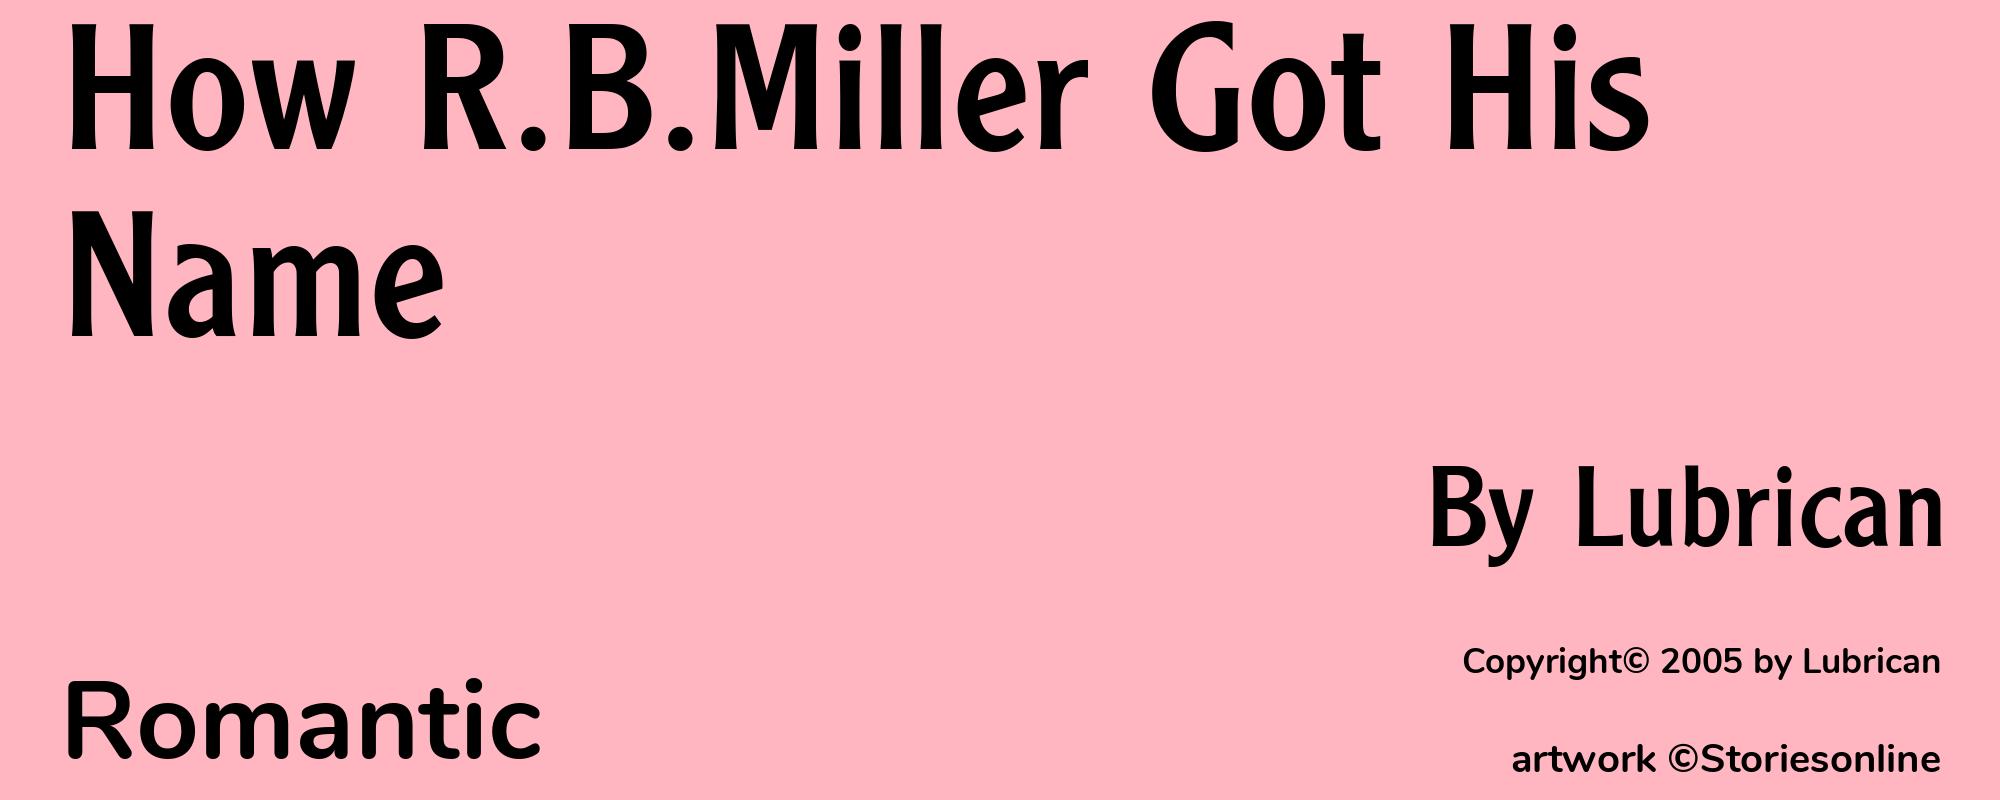 How R.B.Miller Got His Name - Cover